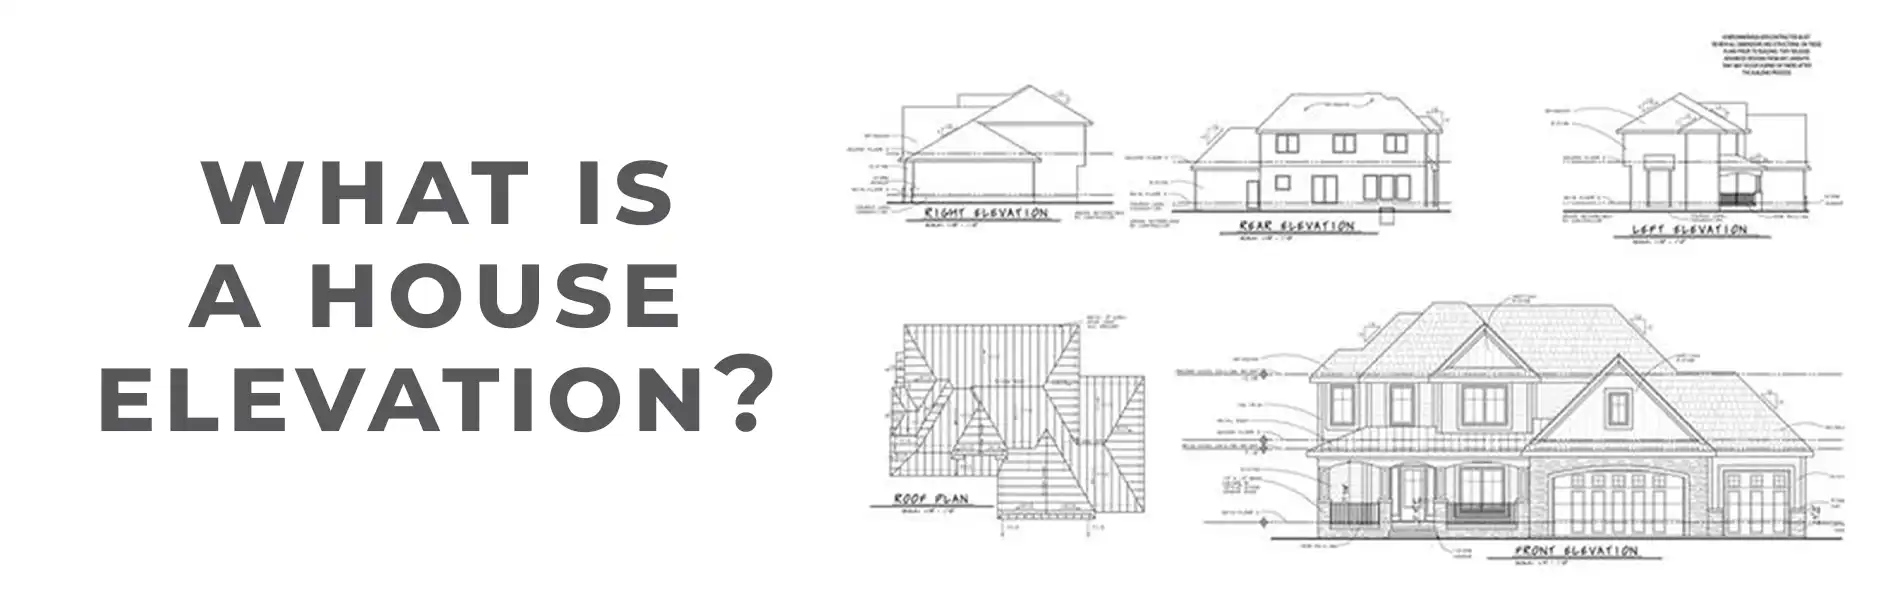 What does house elevation mean